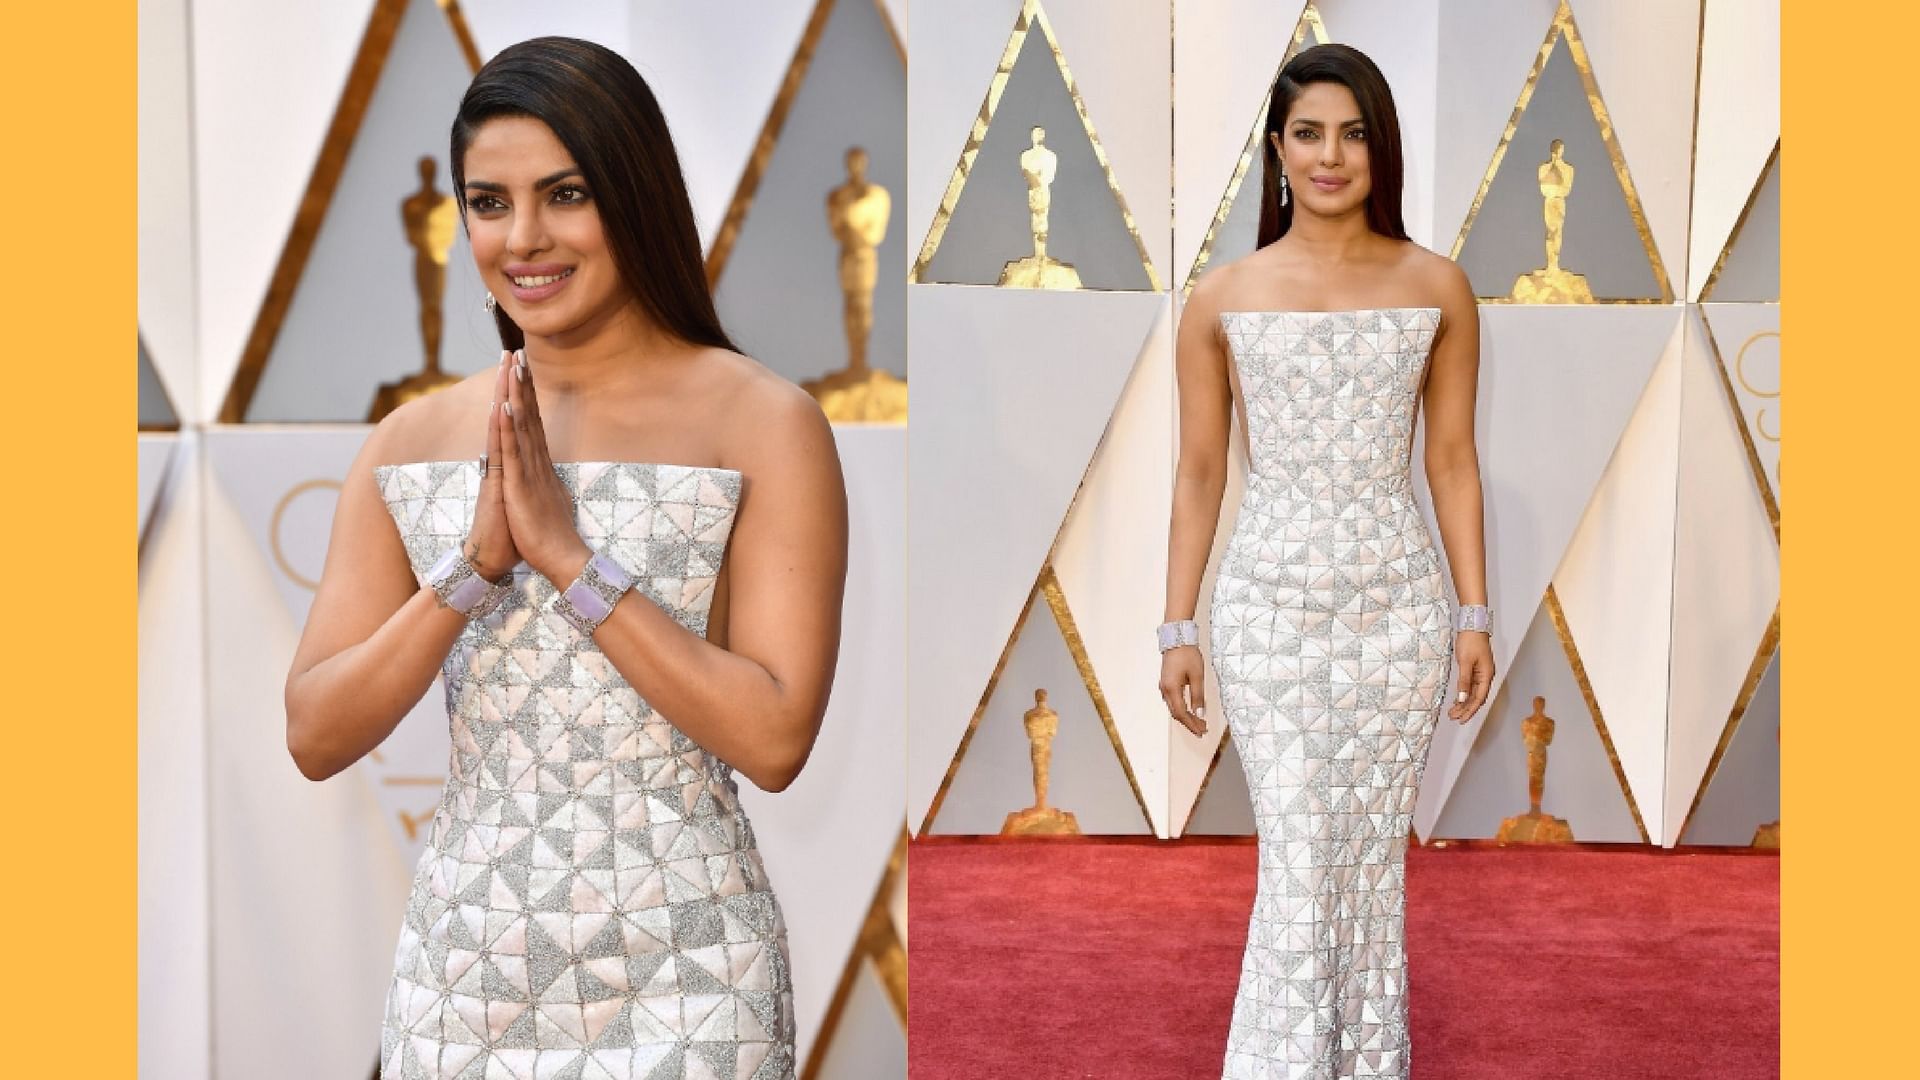 Priyanka Chopra doesn’t disappoint on the Oscars 2017 red carpet. (Photo courtesy: Twitter)